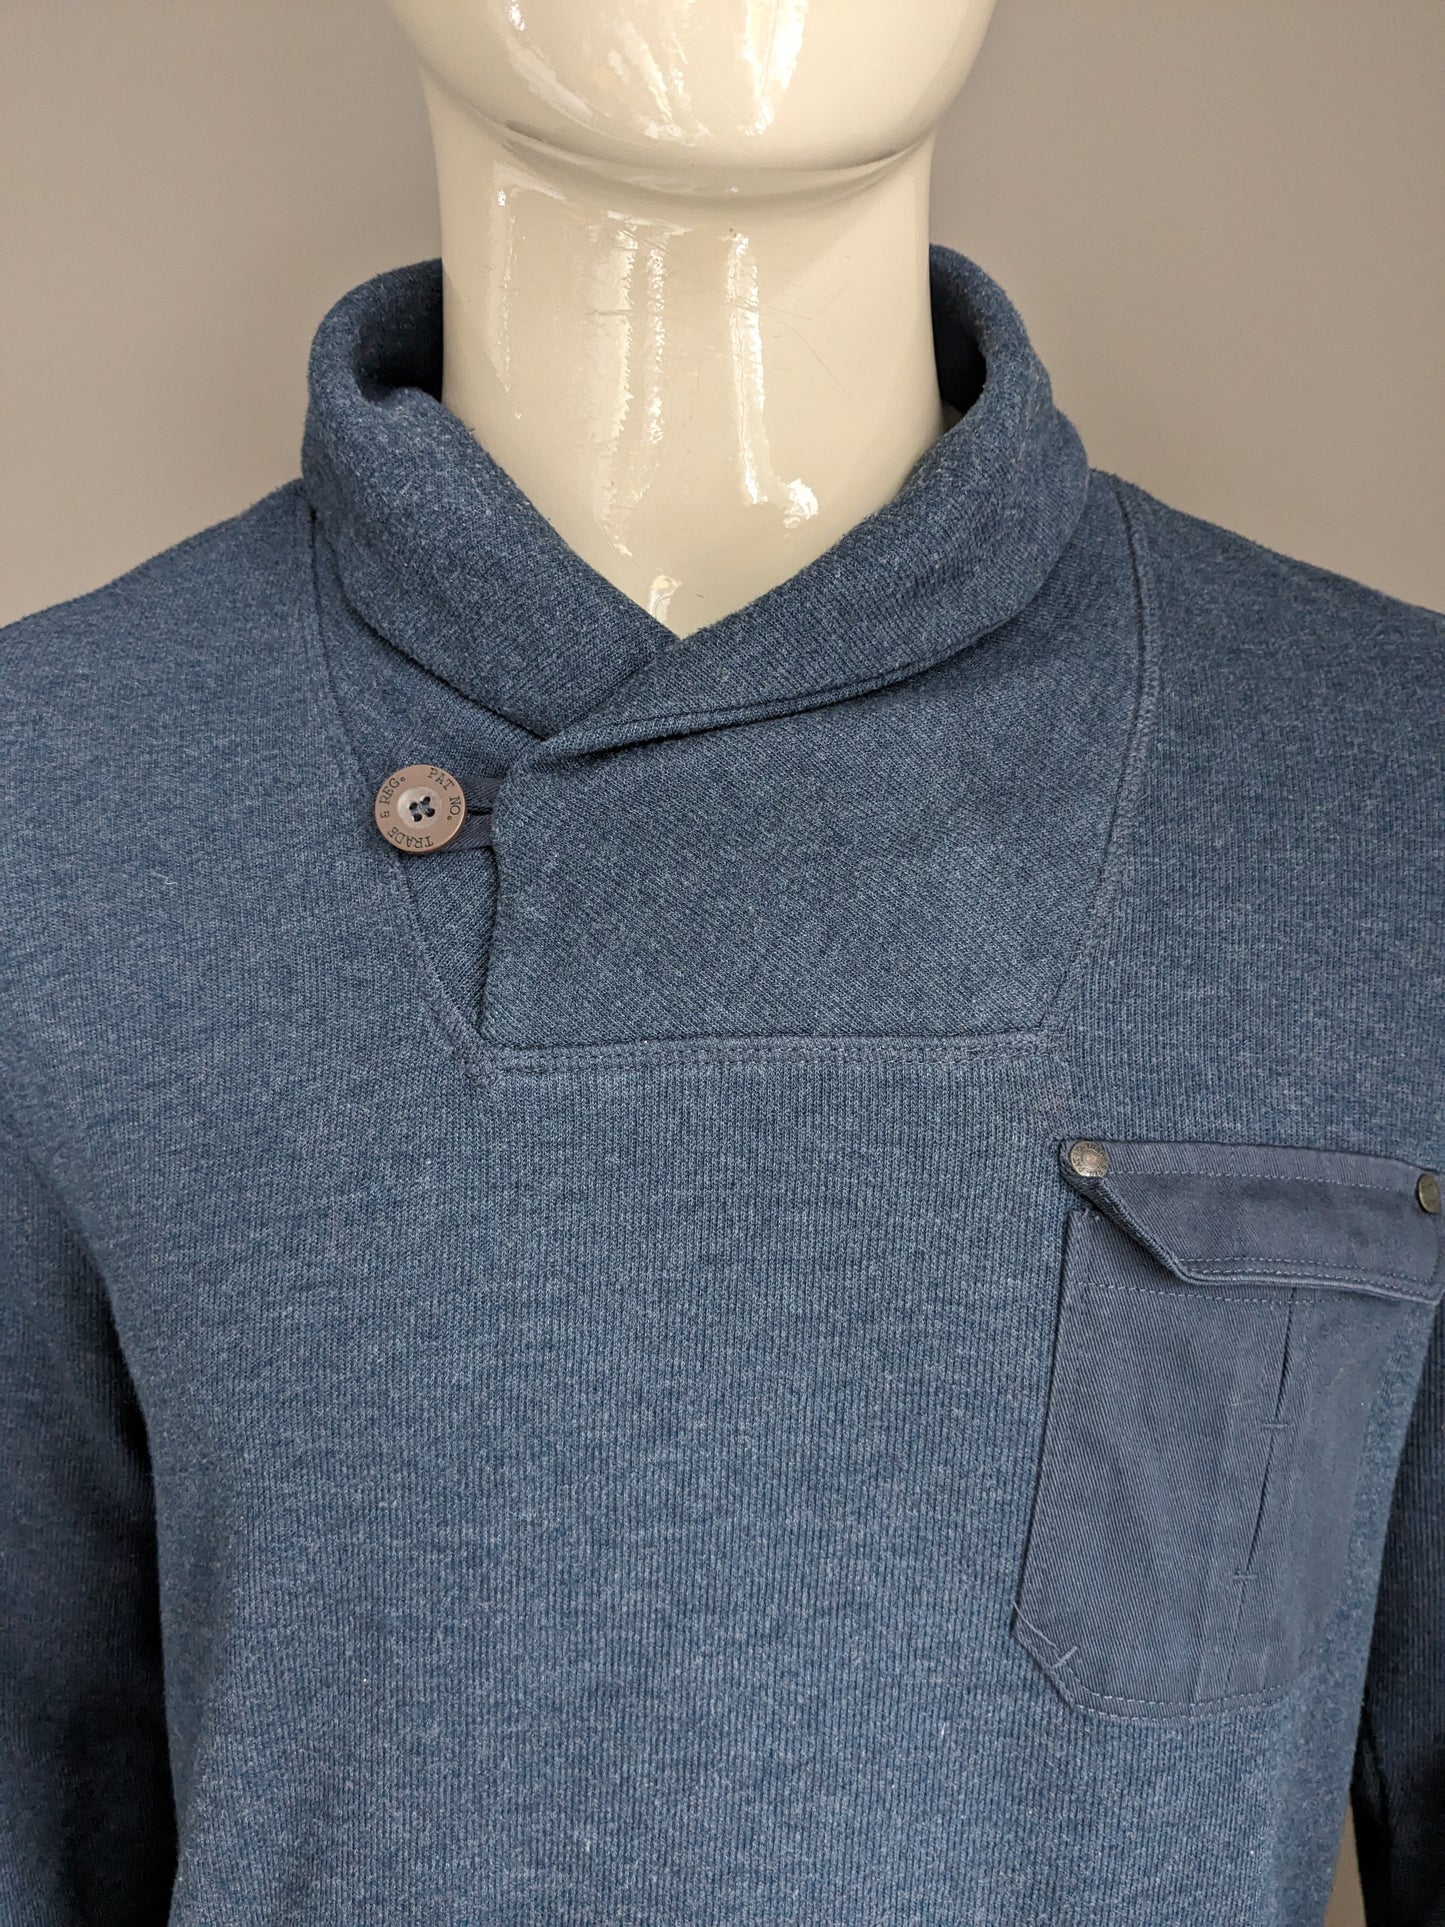 Burton sweater with sporty collar. Dark blue mixed. Size L.